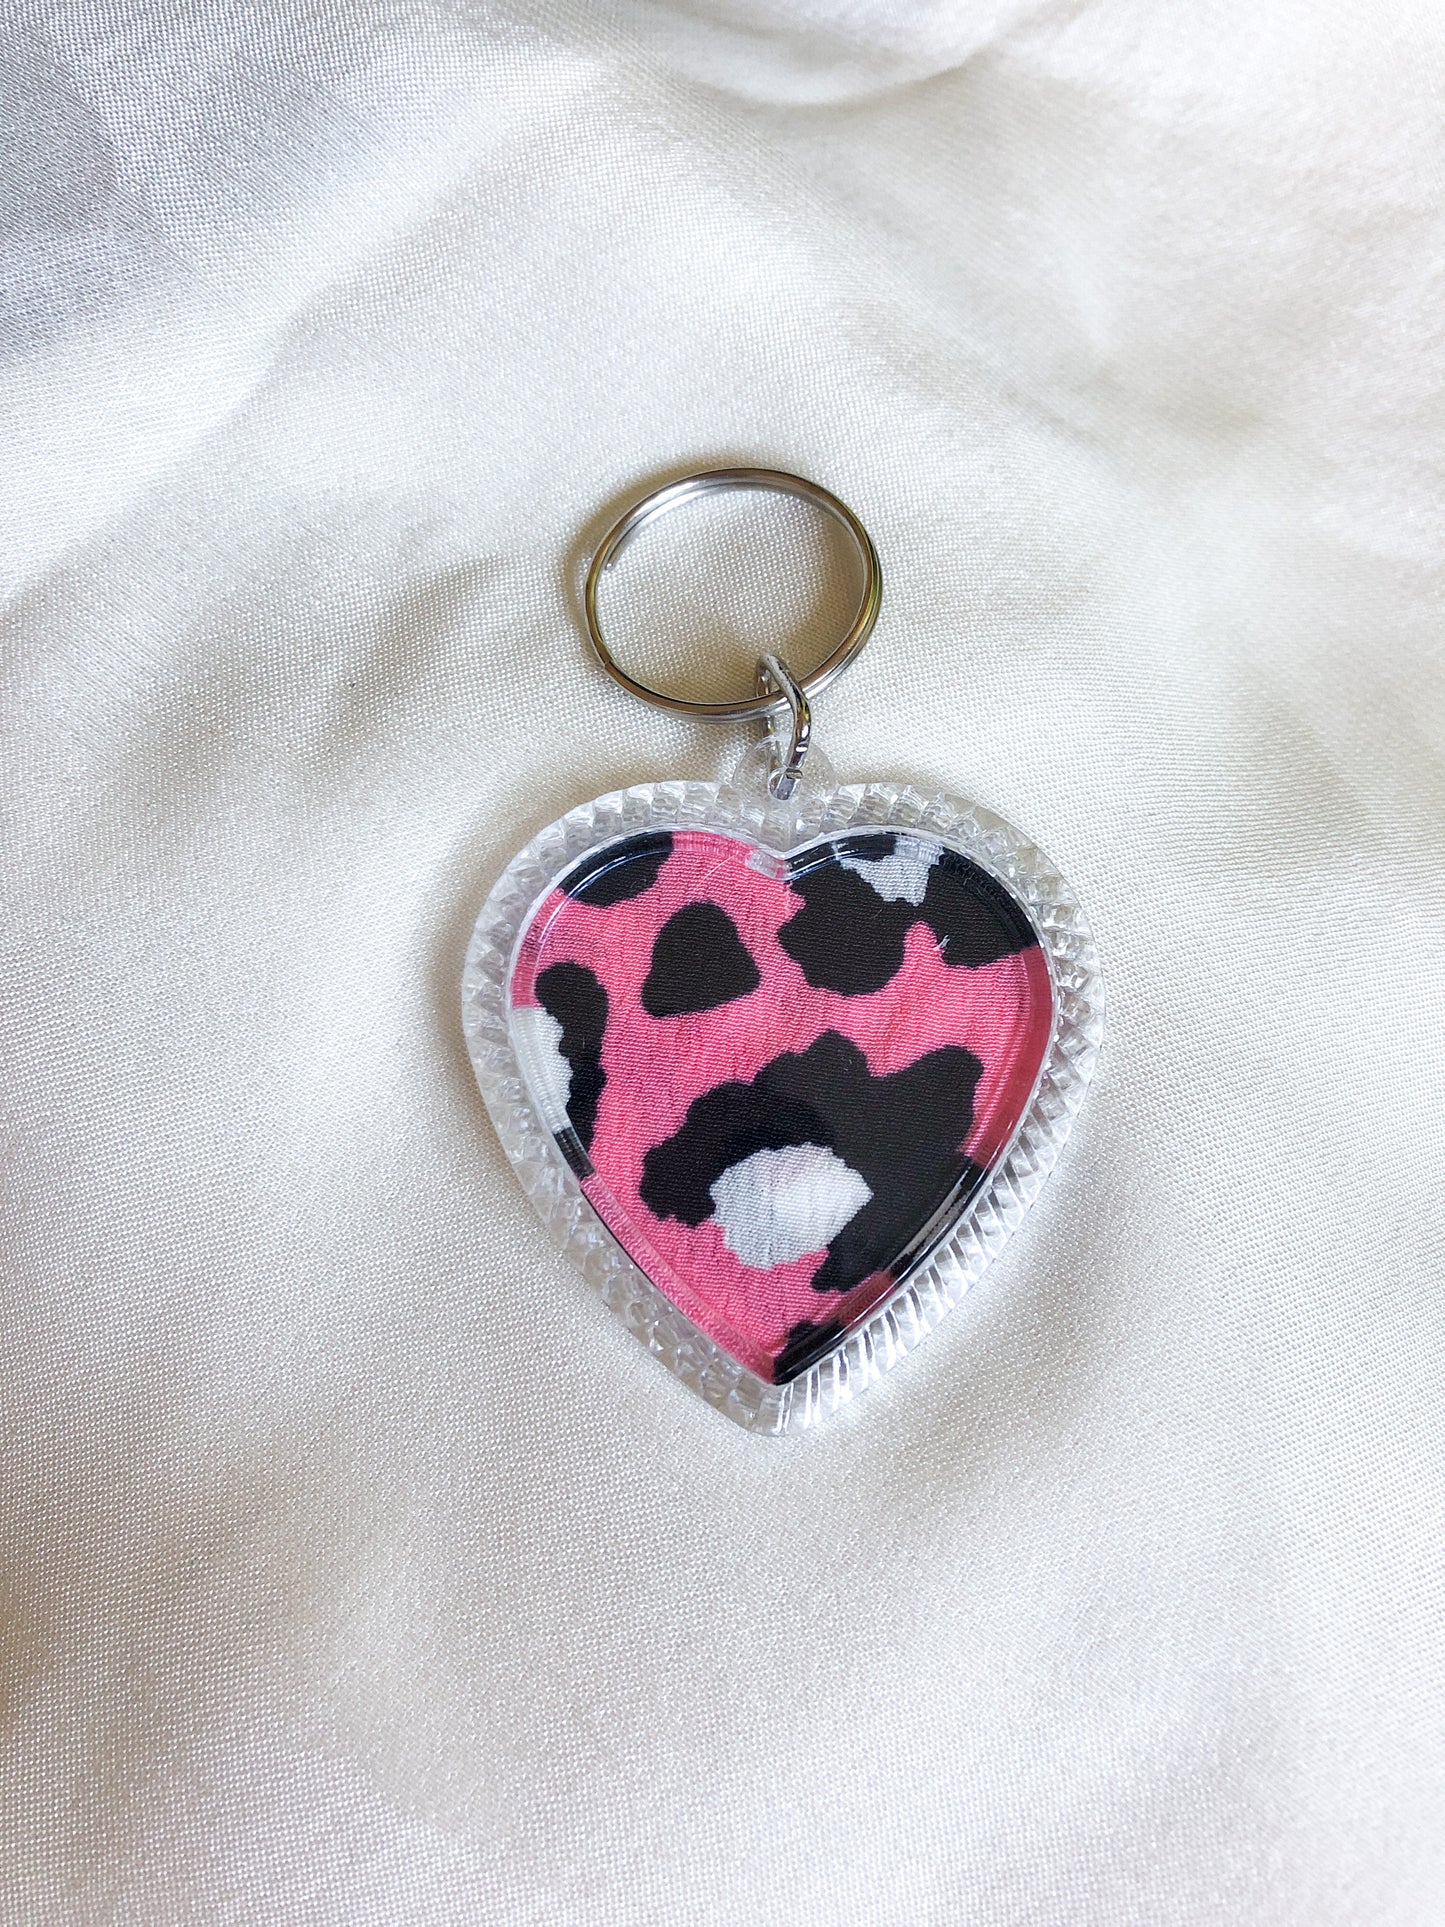 Heart Shaped Keyring - Pink Leopard and Zebra Heart - Upcycled - Duo Design